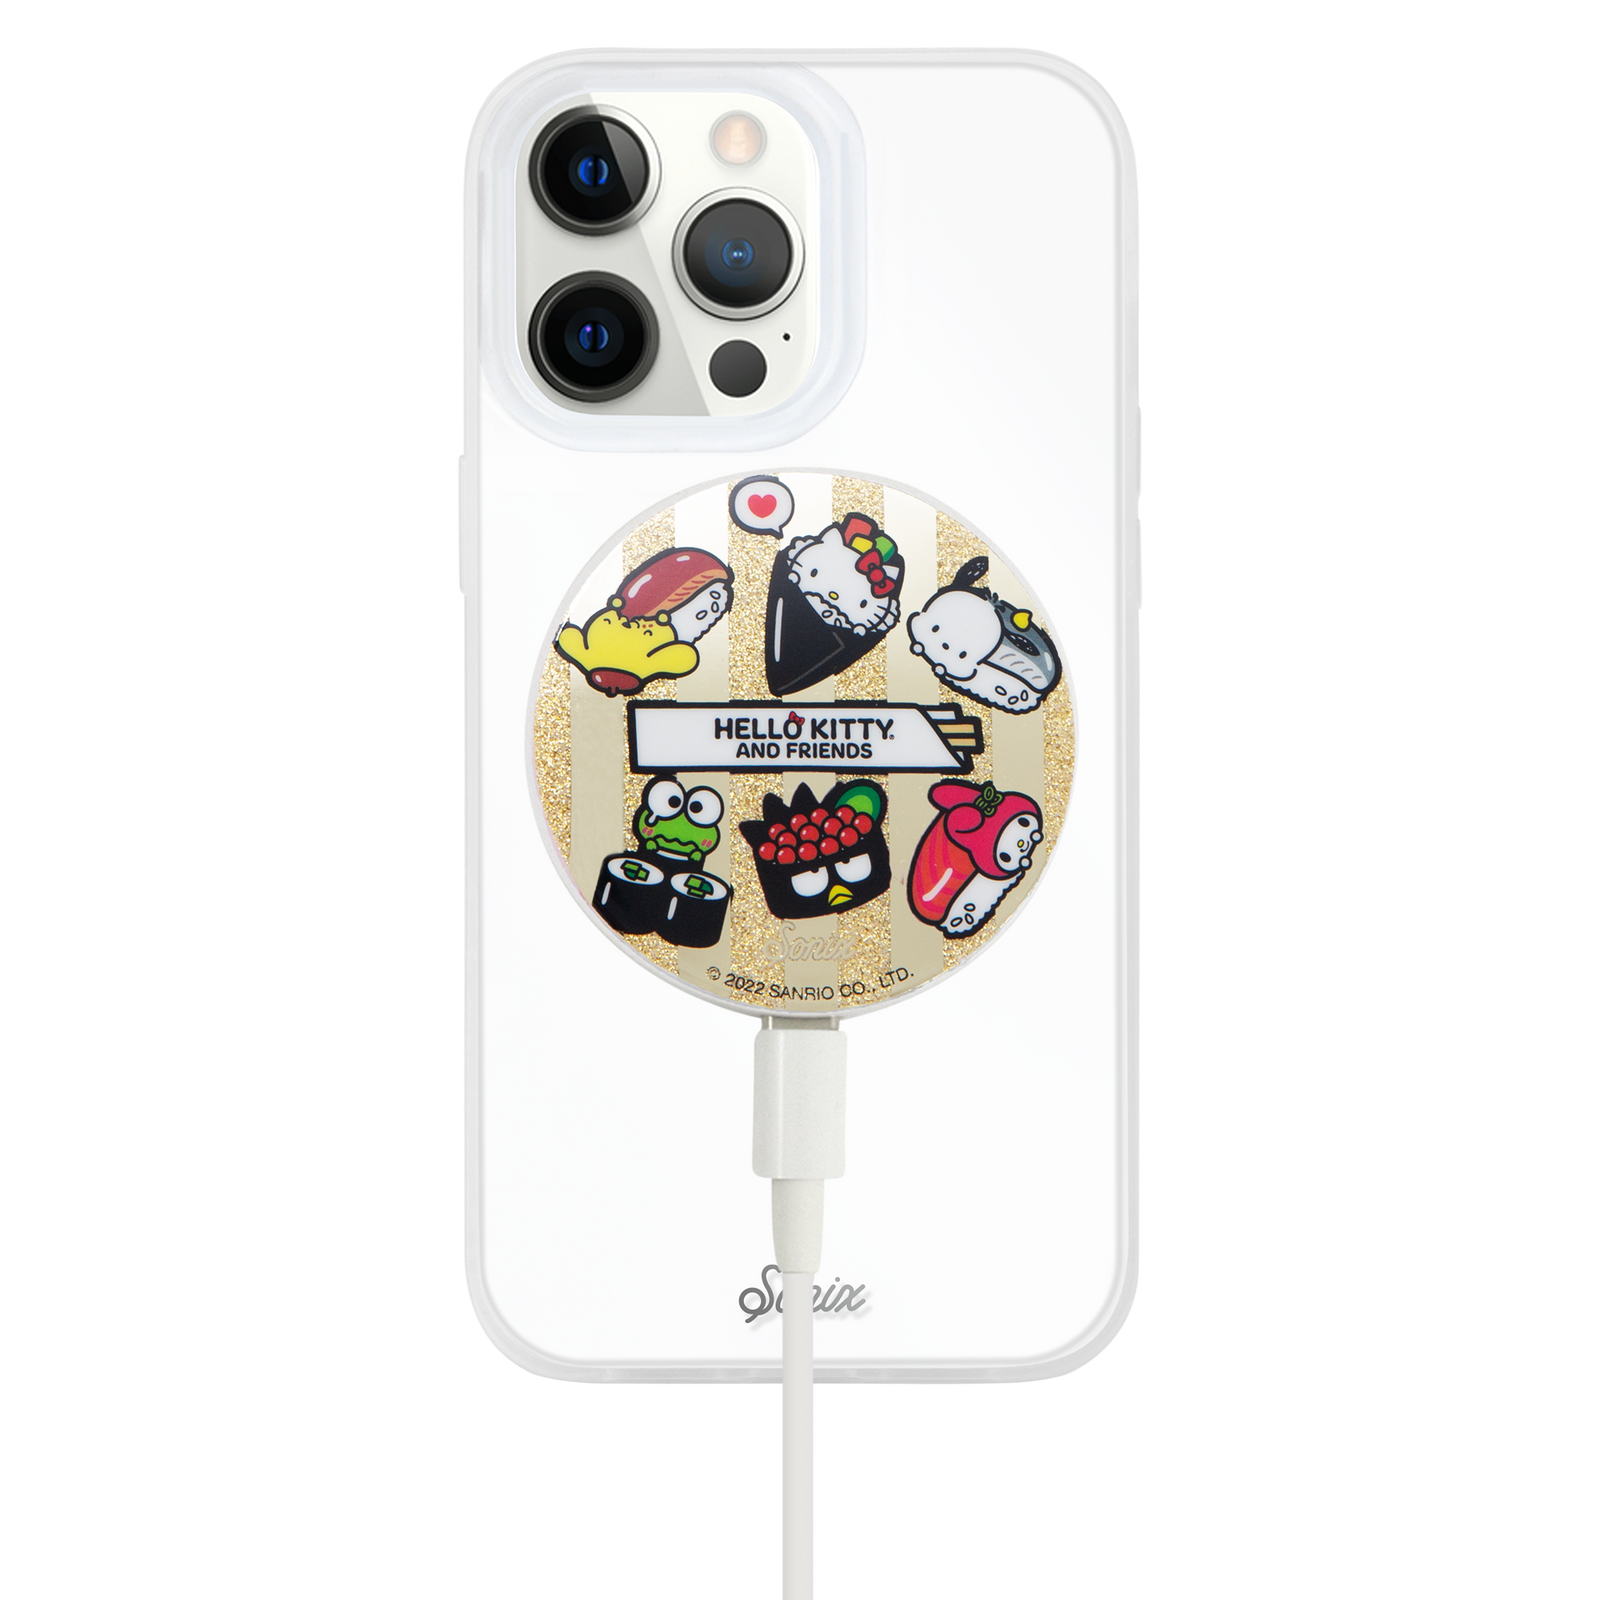 https://cdn.shopify.com/s/files/1/0416/8083/0620/products/Hello_Kitty_And_Friends_Sushi_Magnetic_Link__Wireless_Charger_Phone_clipping_1600x.png?v=1684900732